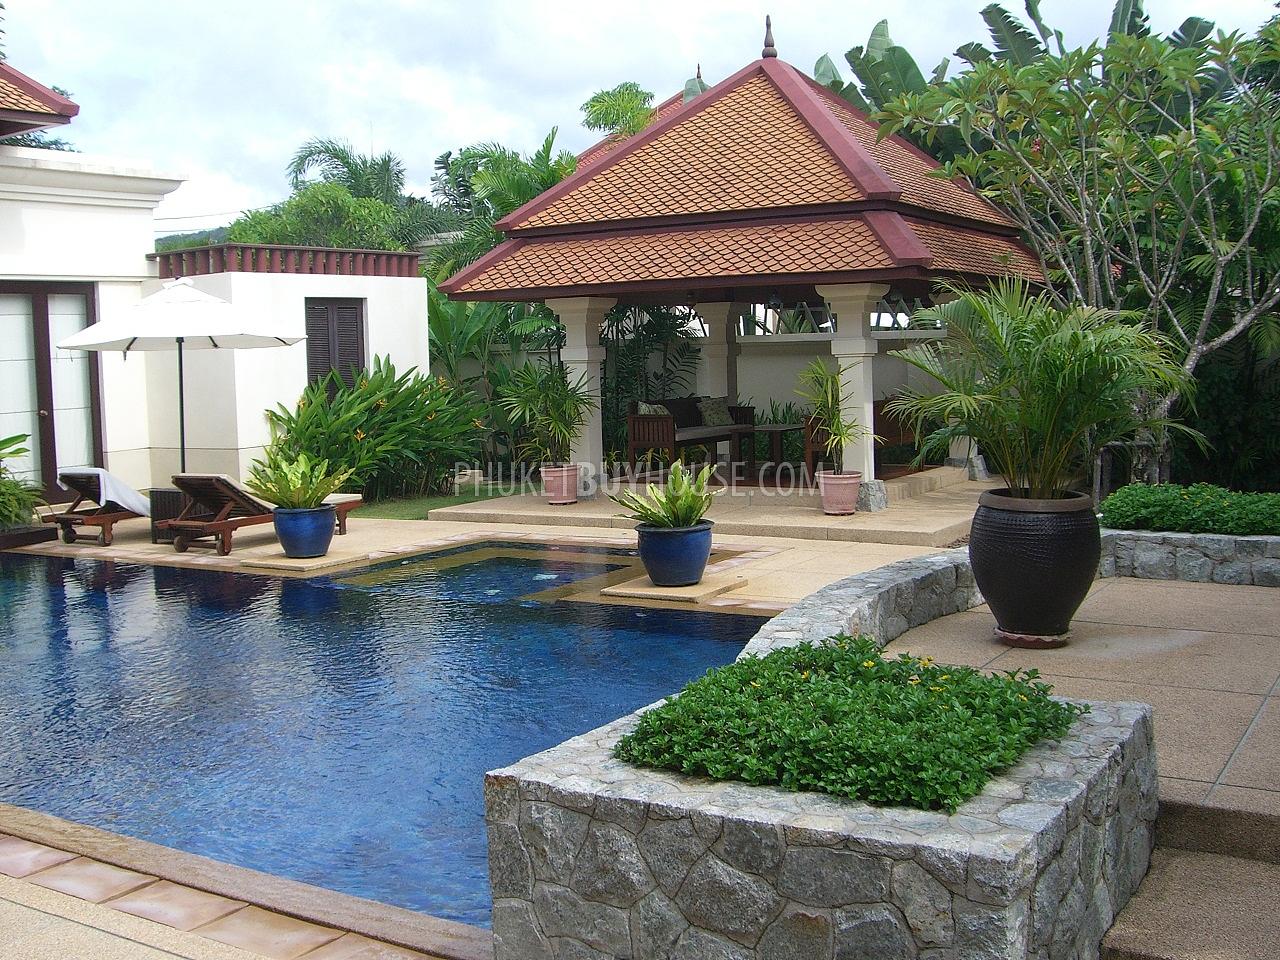 BAN1211: Villa with overlooks the Pool and exquisite Thai garden. Photo #3